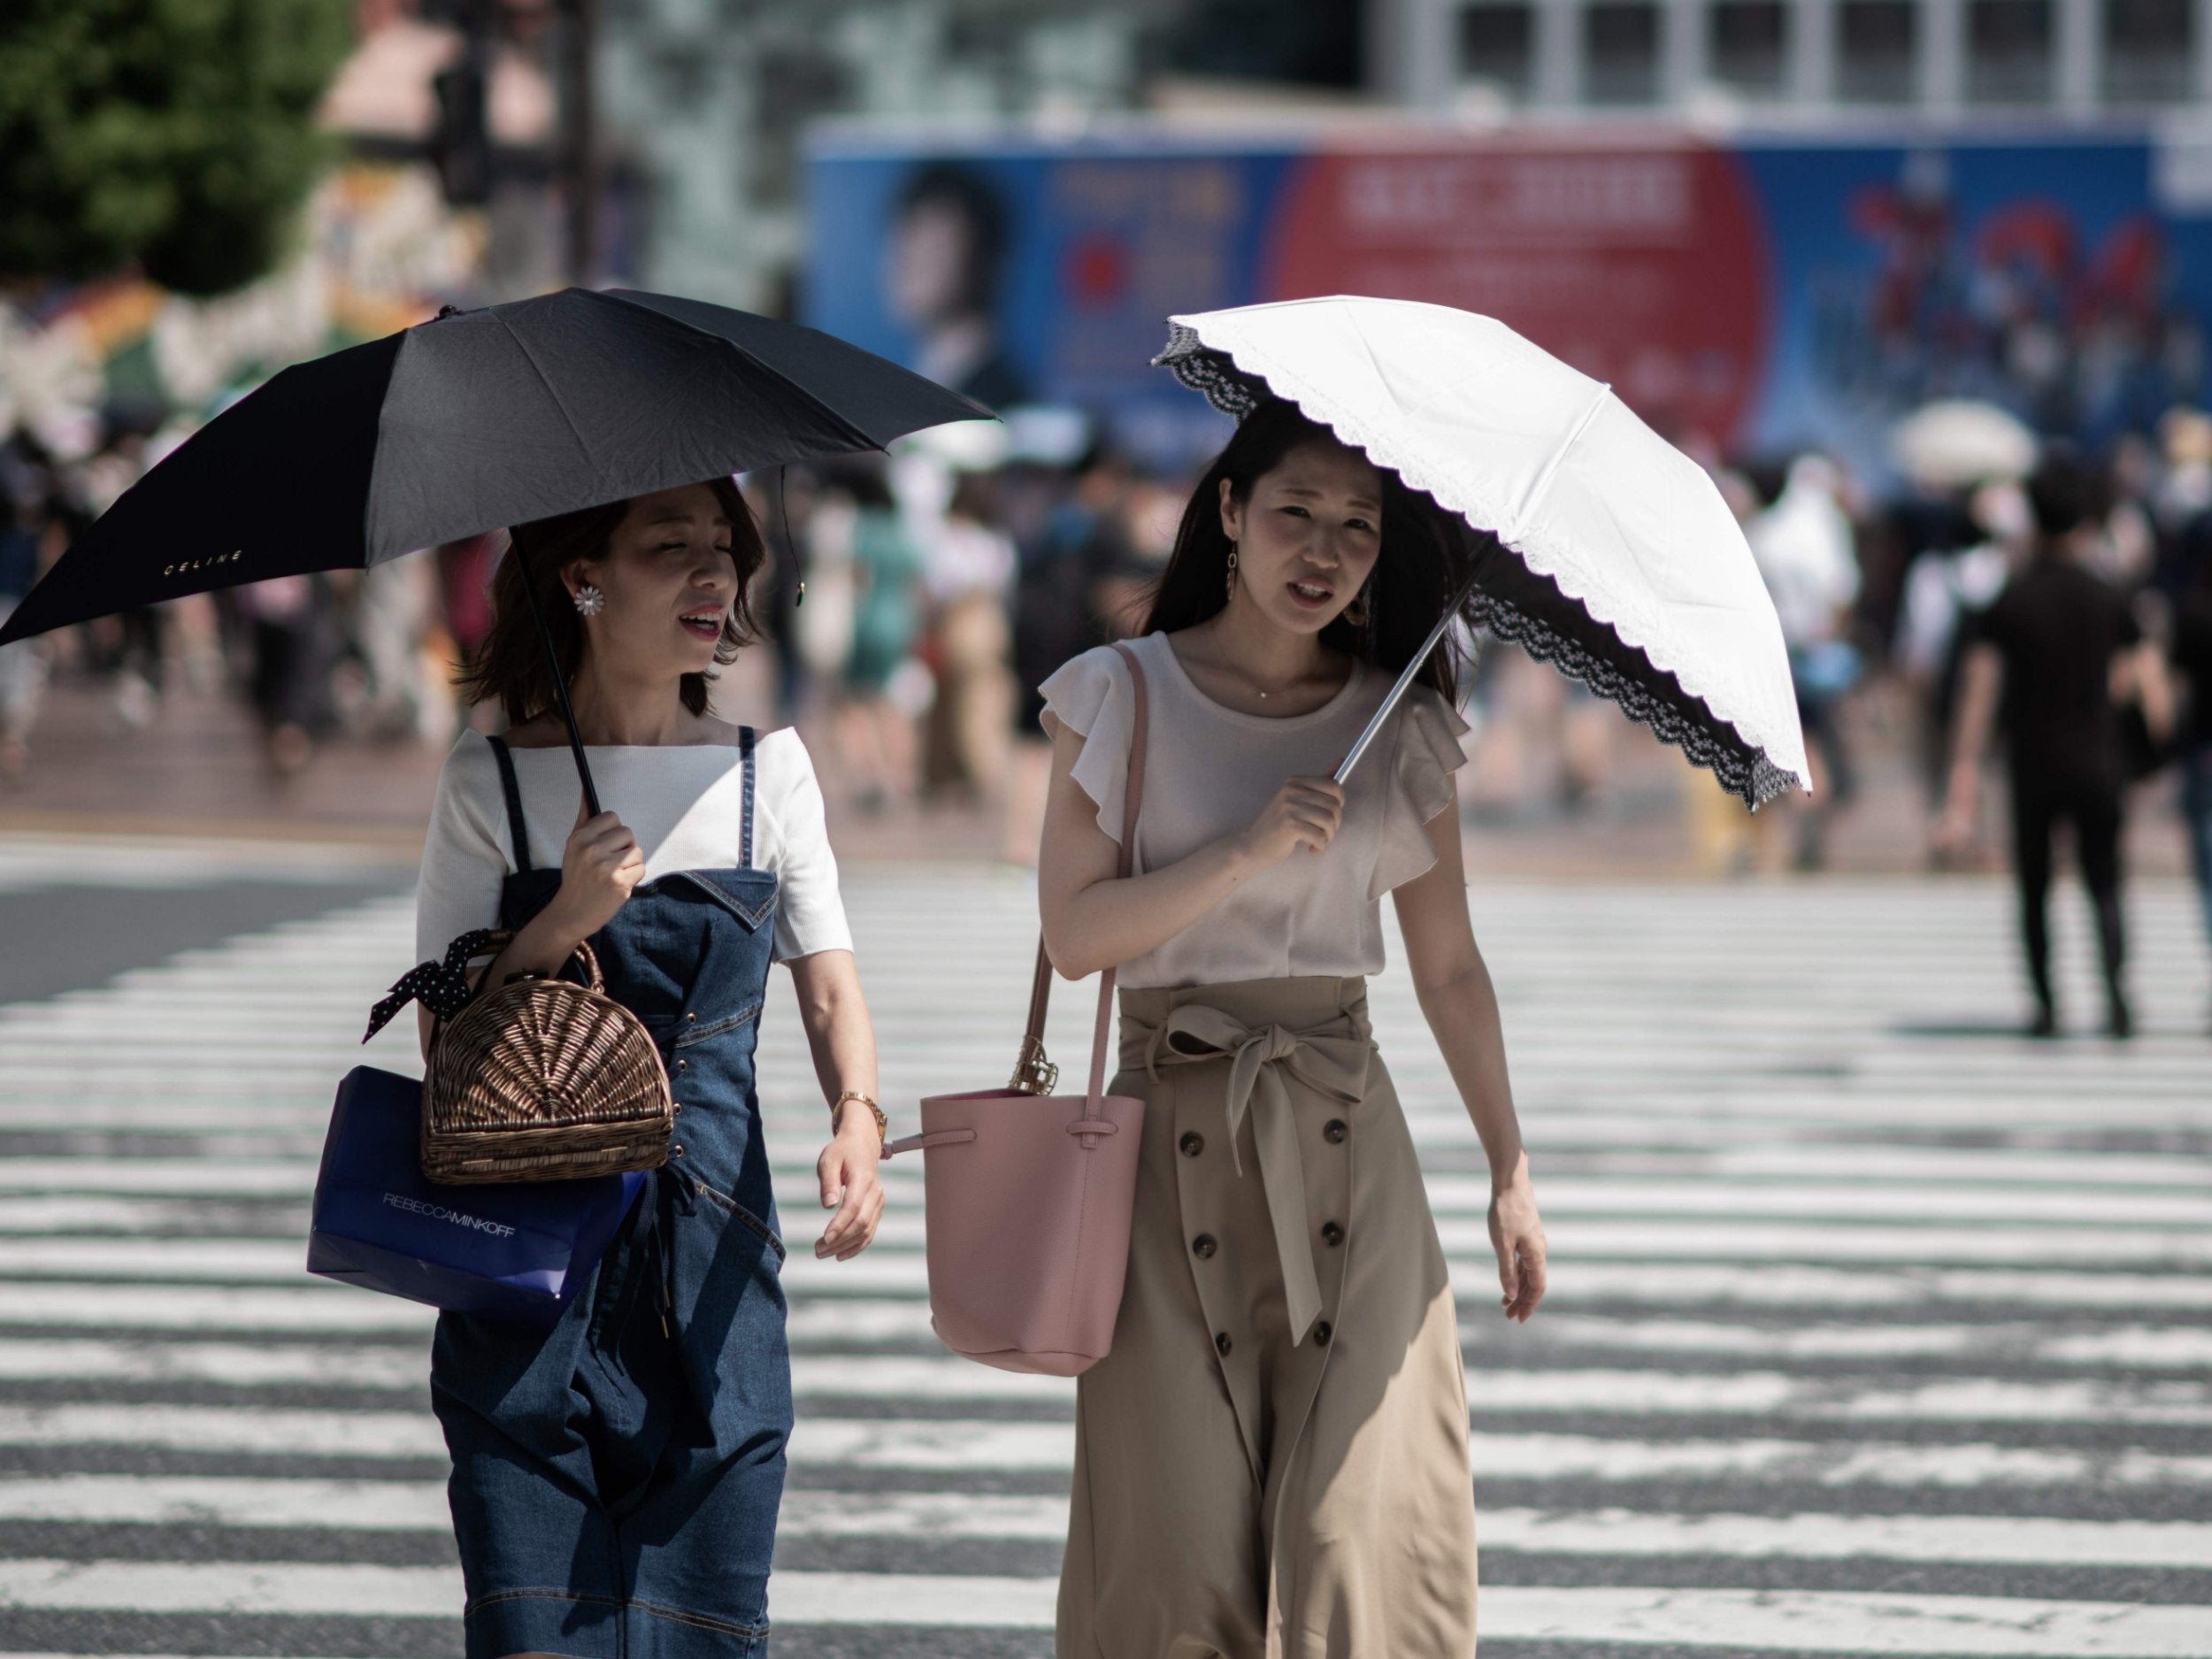 Japan’s rain season ended at its earliest date on record